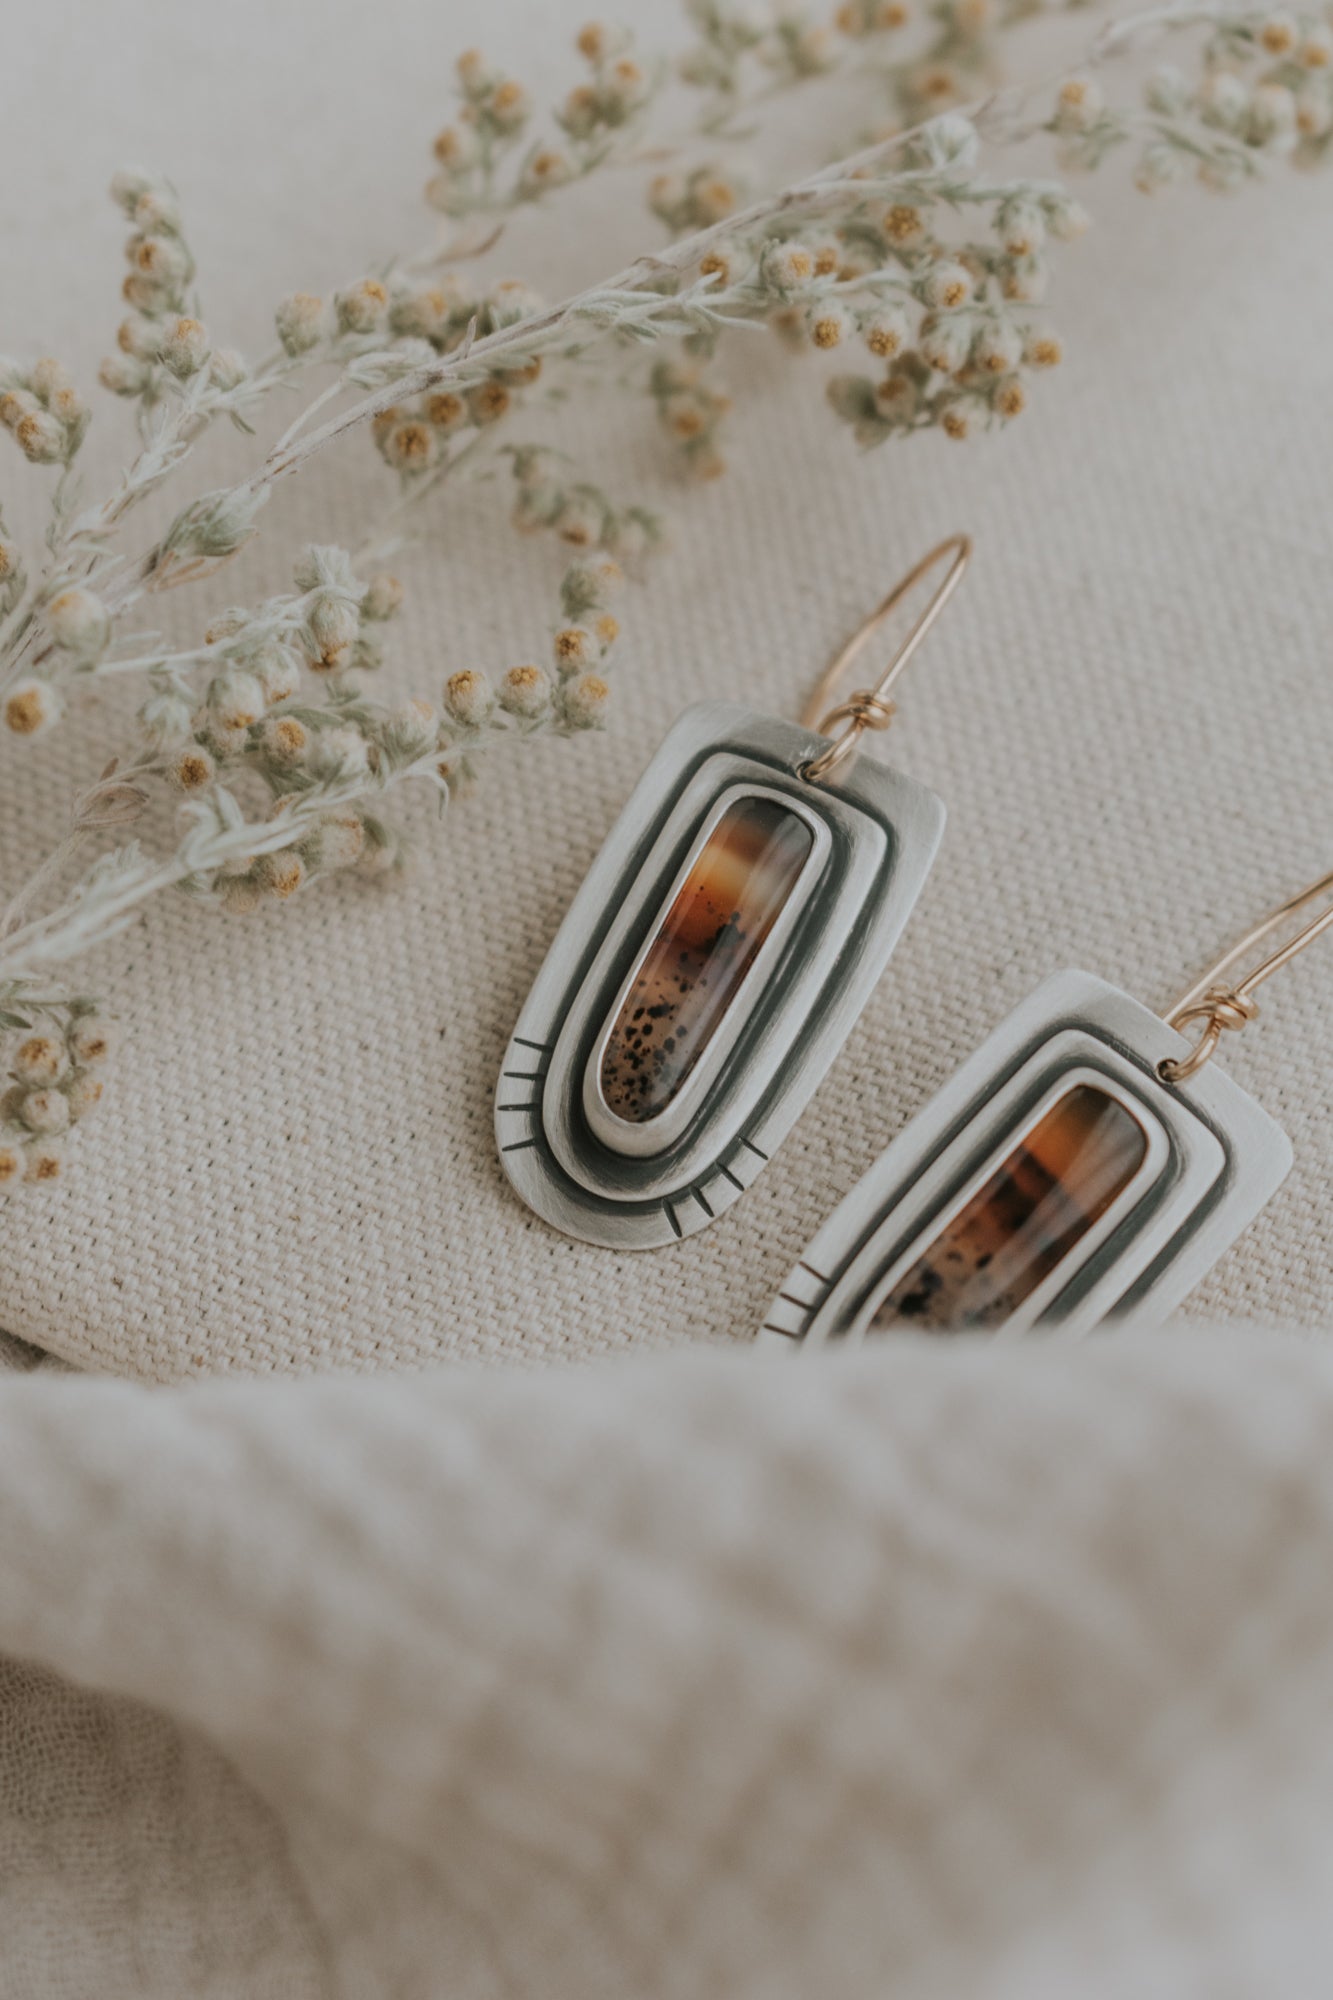 Montana Agate Statement Earrings with Gold-Filled Earwires - Third Hand Silversmith LLC handmade jewelry, Bozeman, Montana